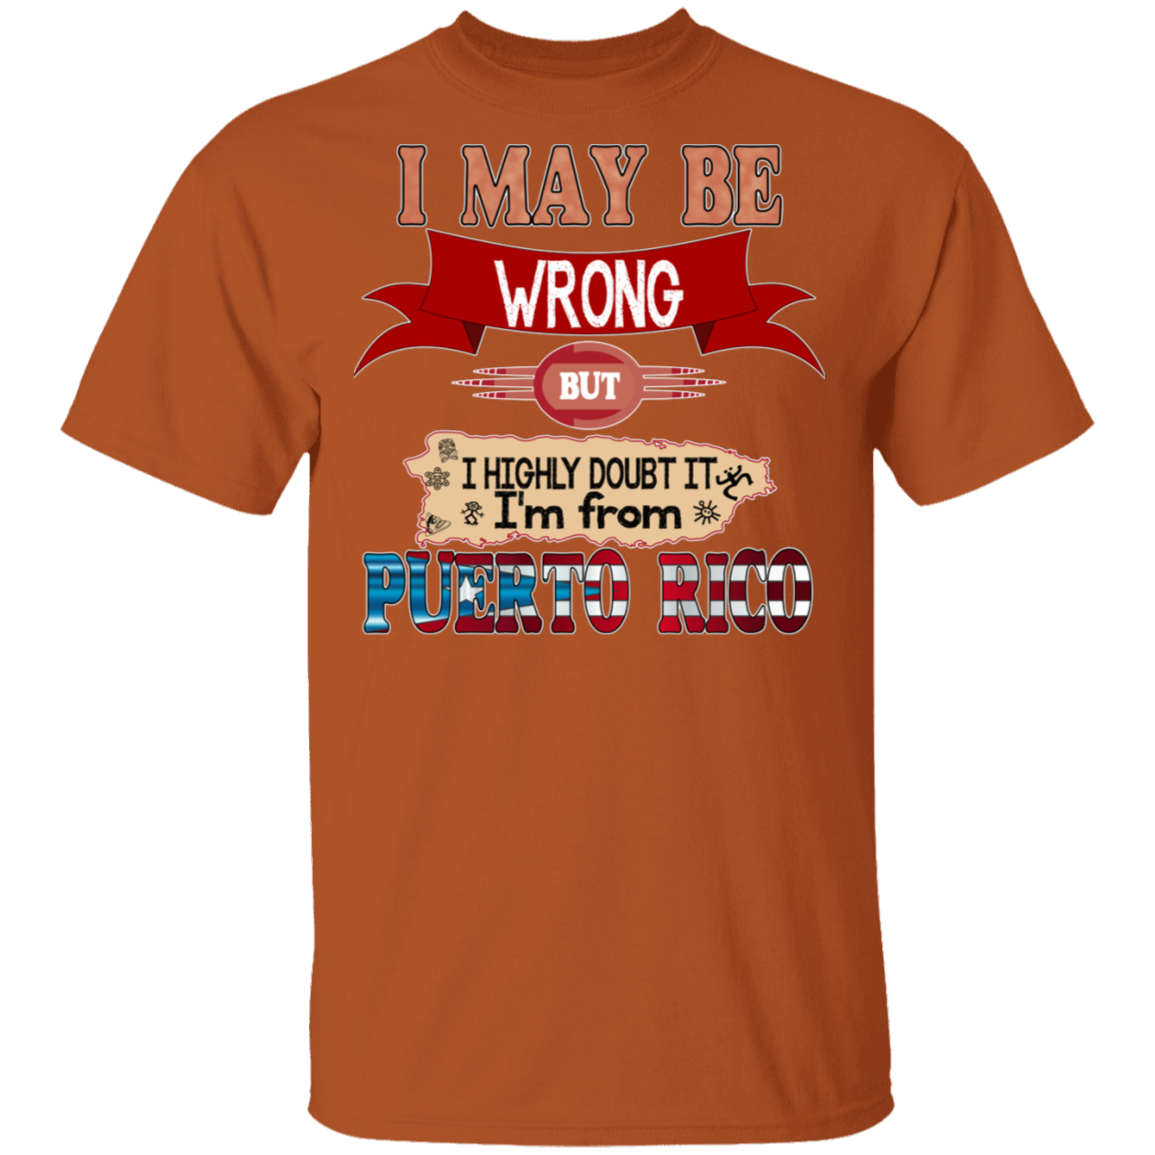 May Be Wrong But Doubt It - 5.3 oz. T-Shirt - Puerto Rican Pride